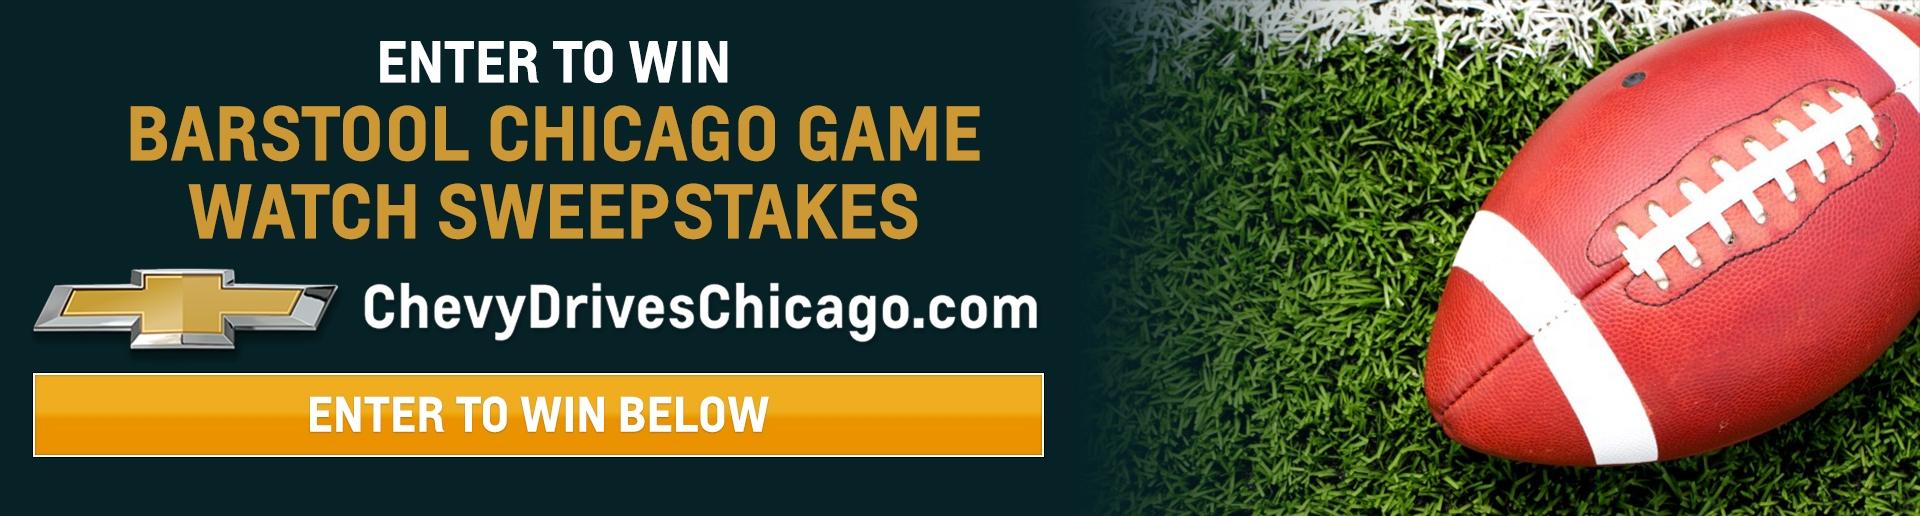 Barstool Chicago Game Watch Contest | Chevy Drives Chicago